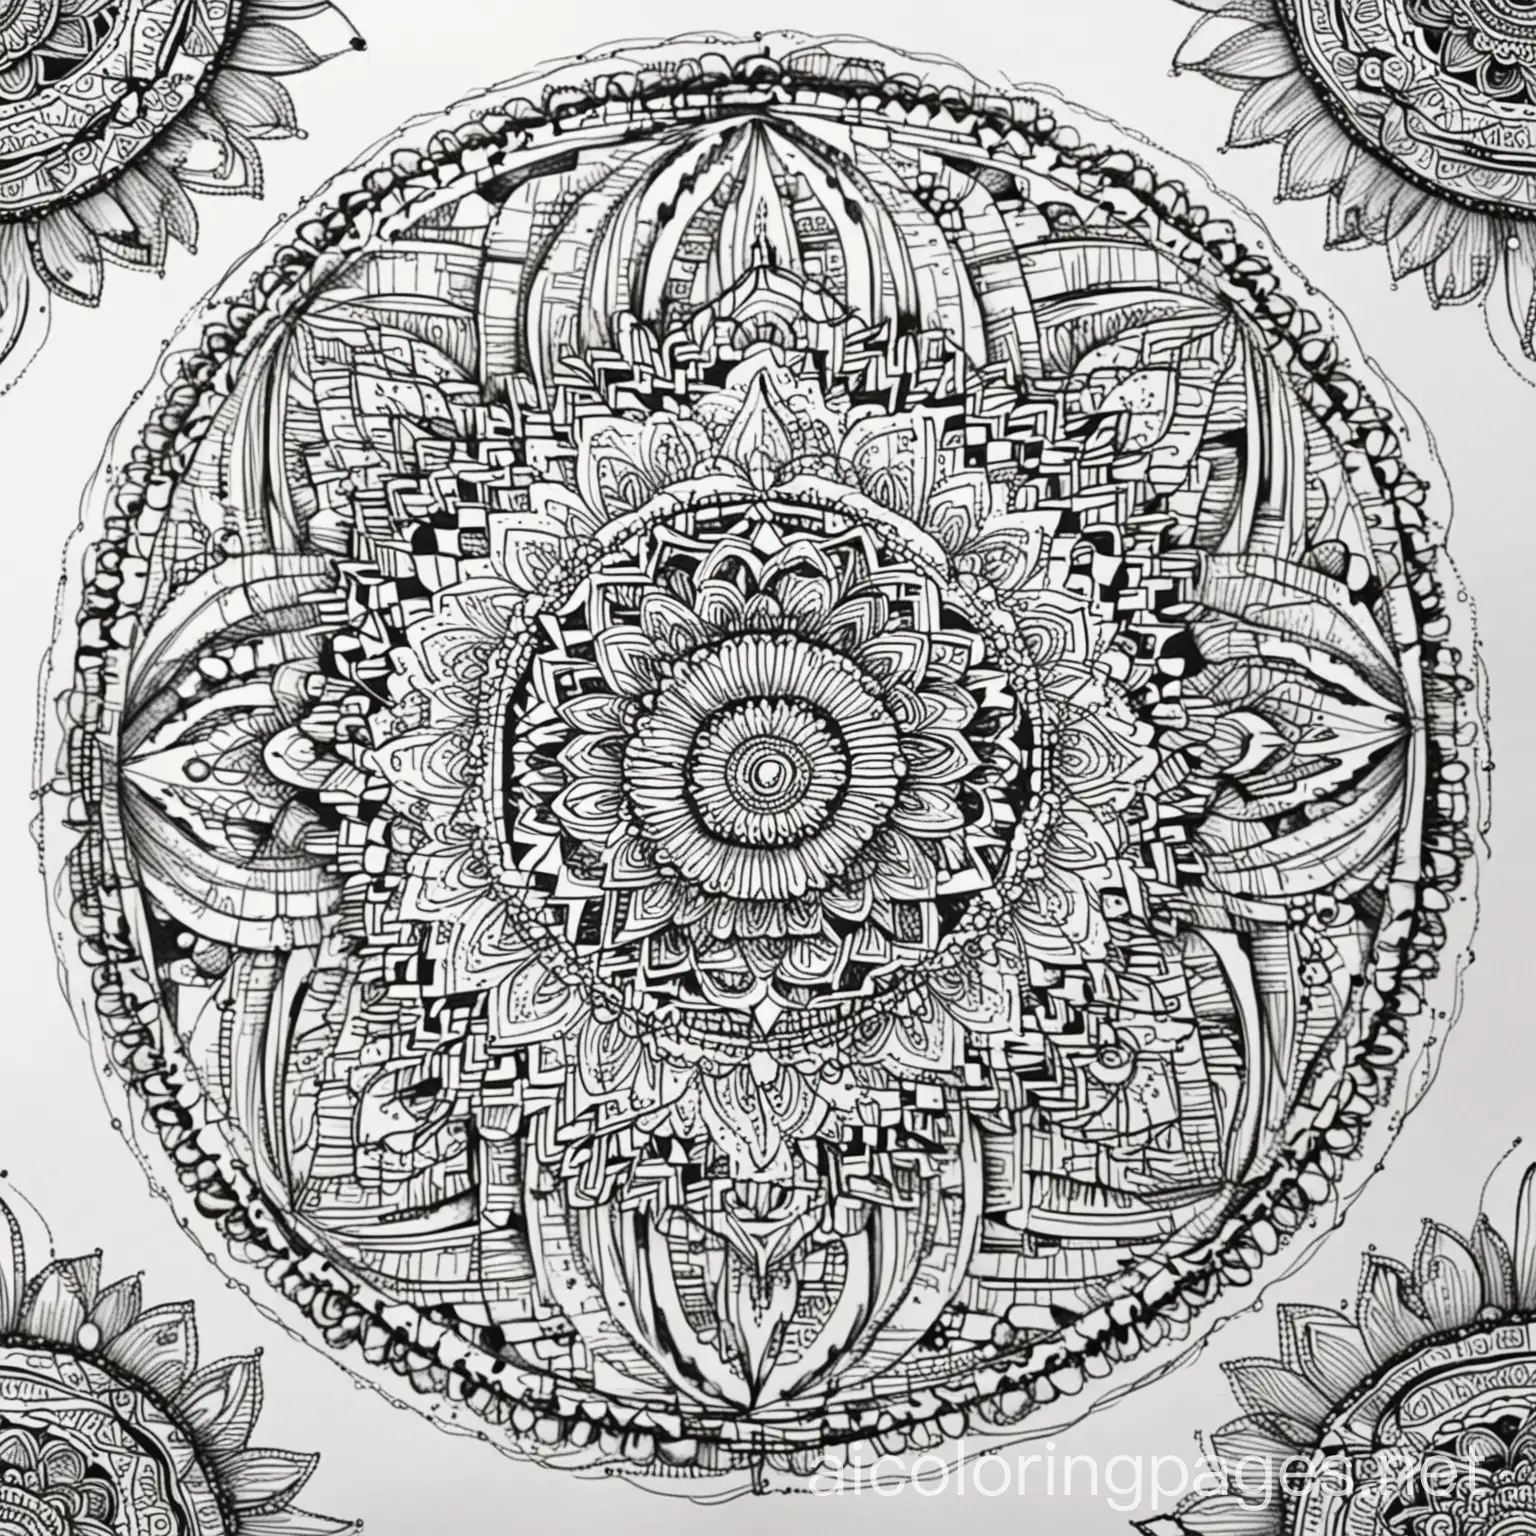 Multiple-Mandalas-Coloring-Page-with-Simplicity-and-Ample-White-Space